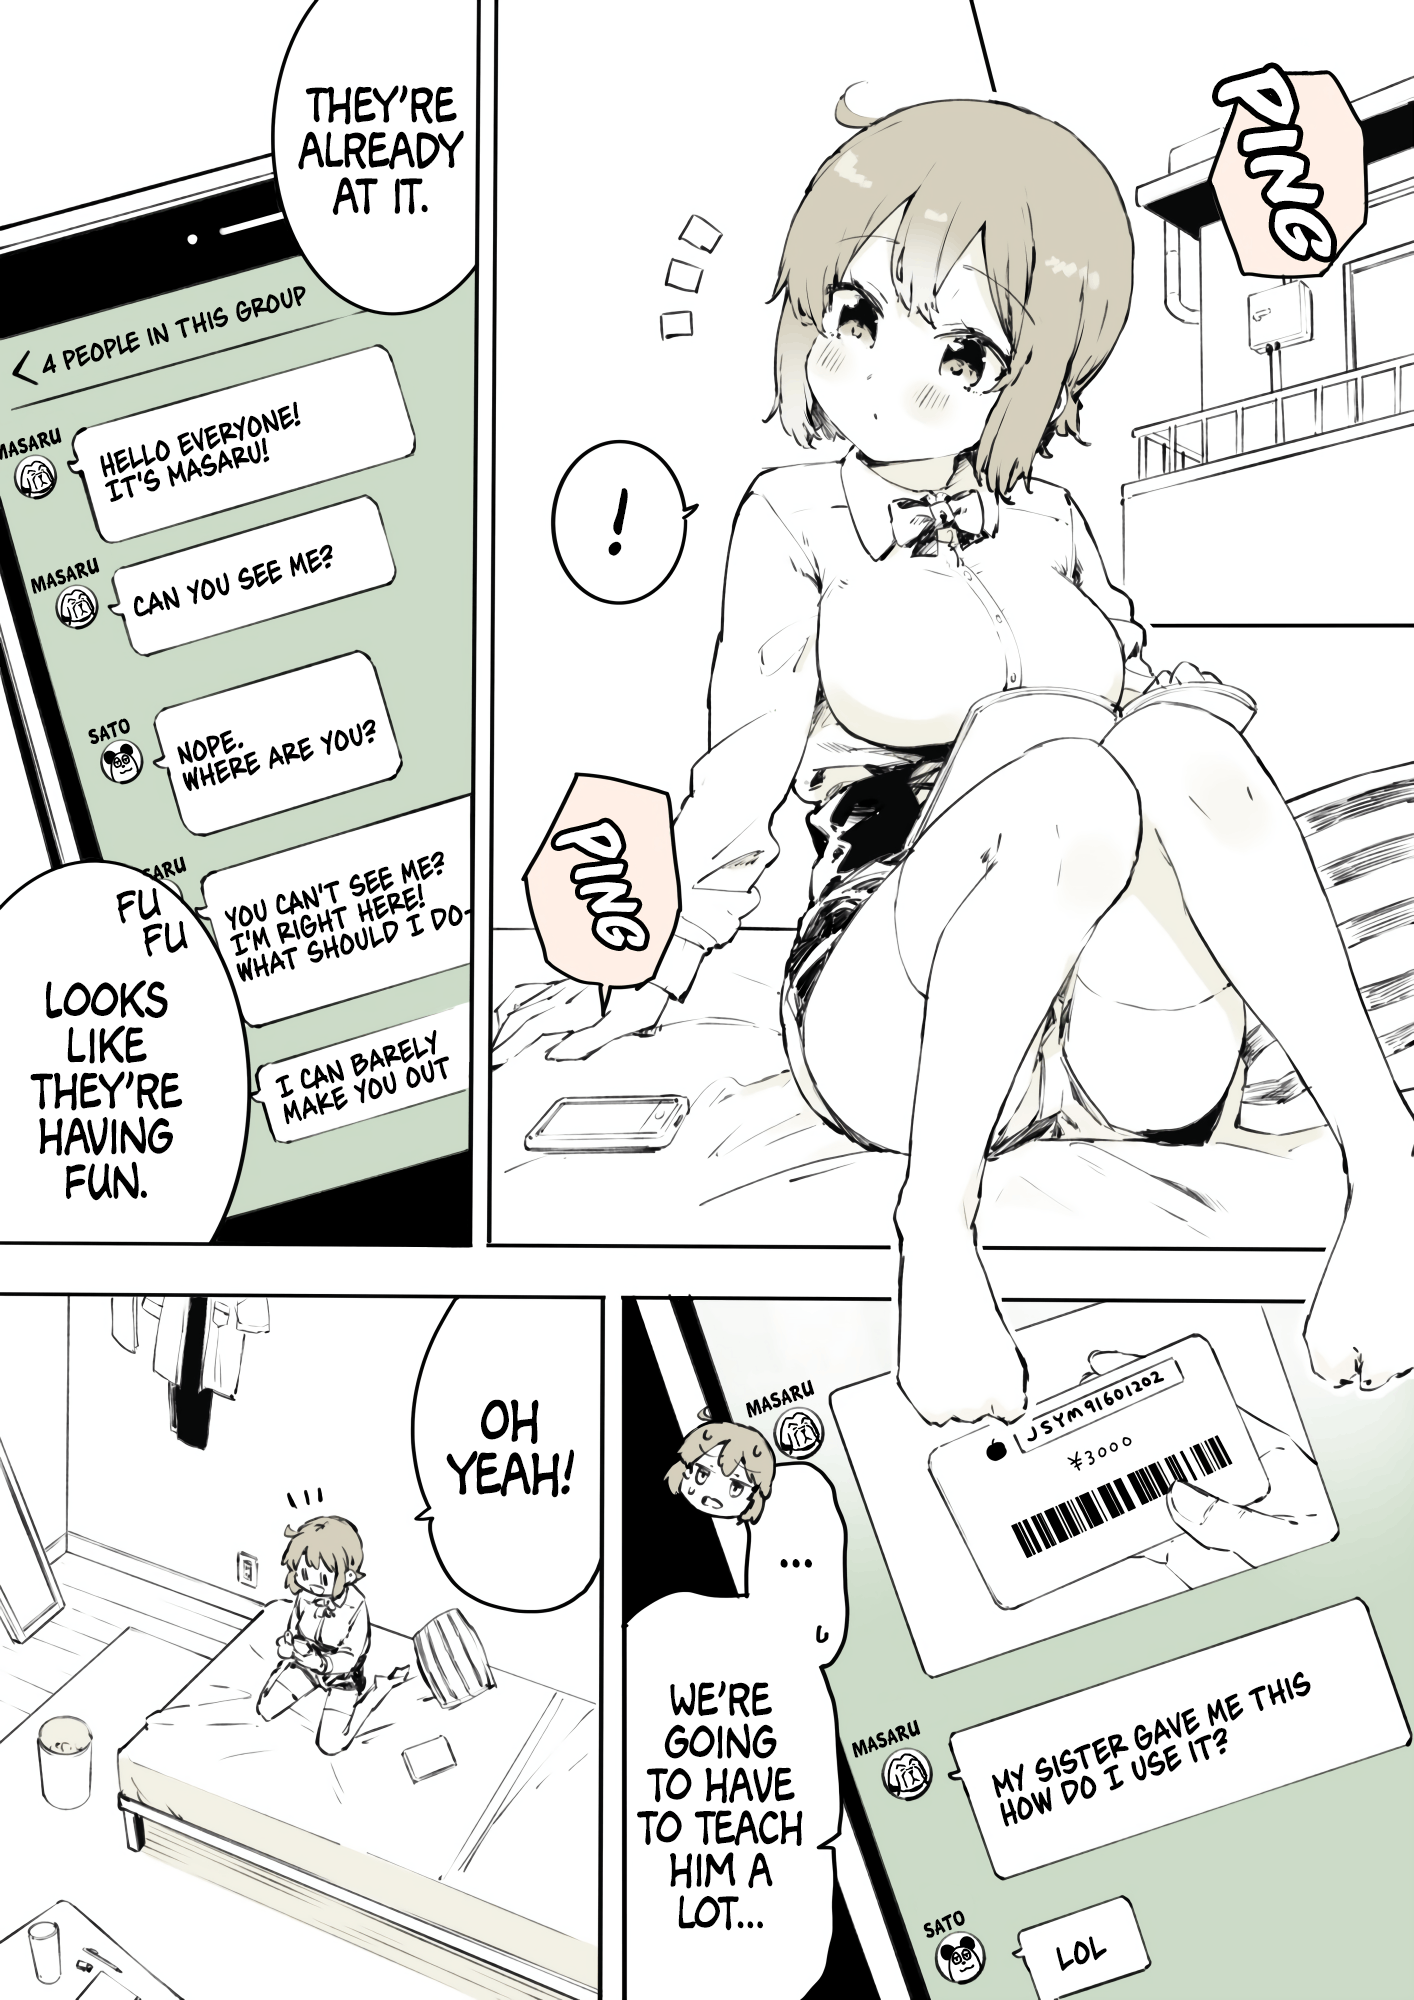 A Boy That Can't Stop Crossdressing - Page 2